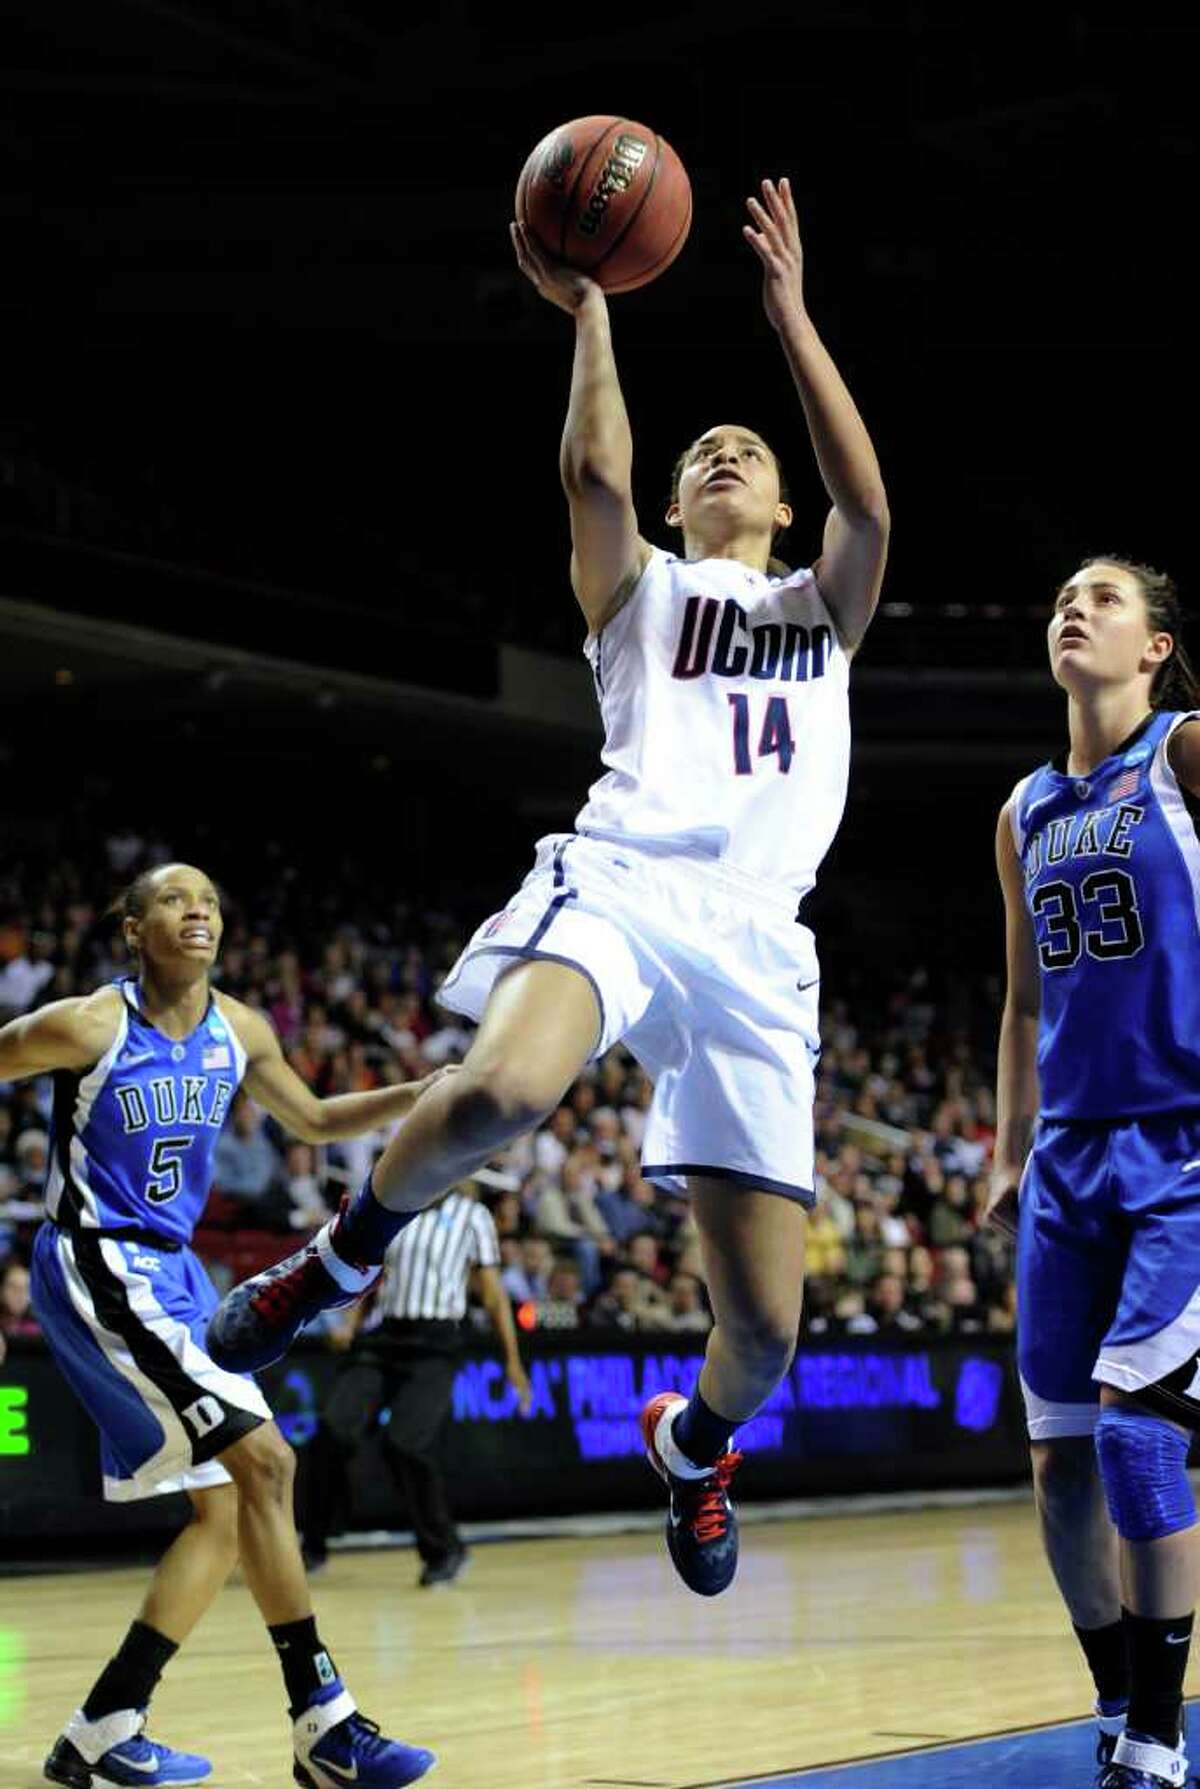 Connecticut's Bria Hartley (14) shoots past Duke's Jasmine Thomas (5) and Haley Peters in the first half of an NCAA women's college basketball tournament regional final game, Tuesday, March 29, 2011, in Philadelphia. (AP Photo/Barbara Johnston)